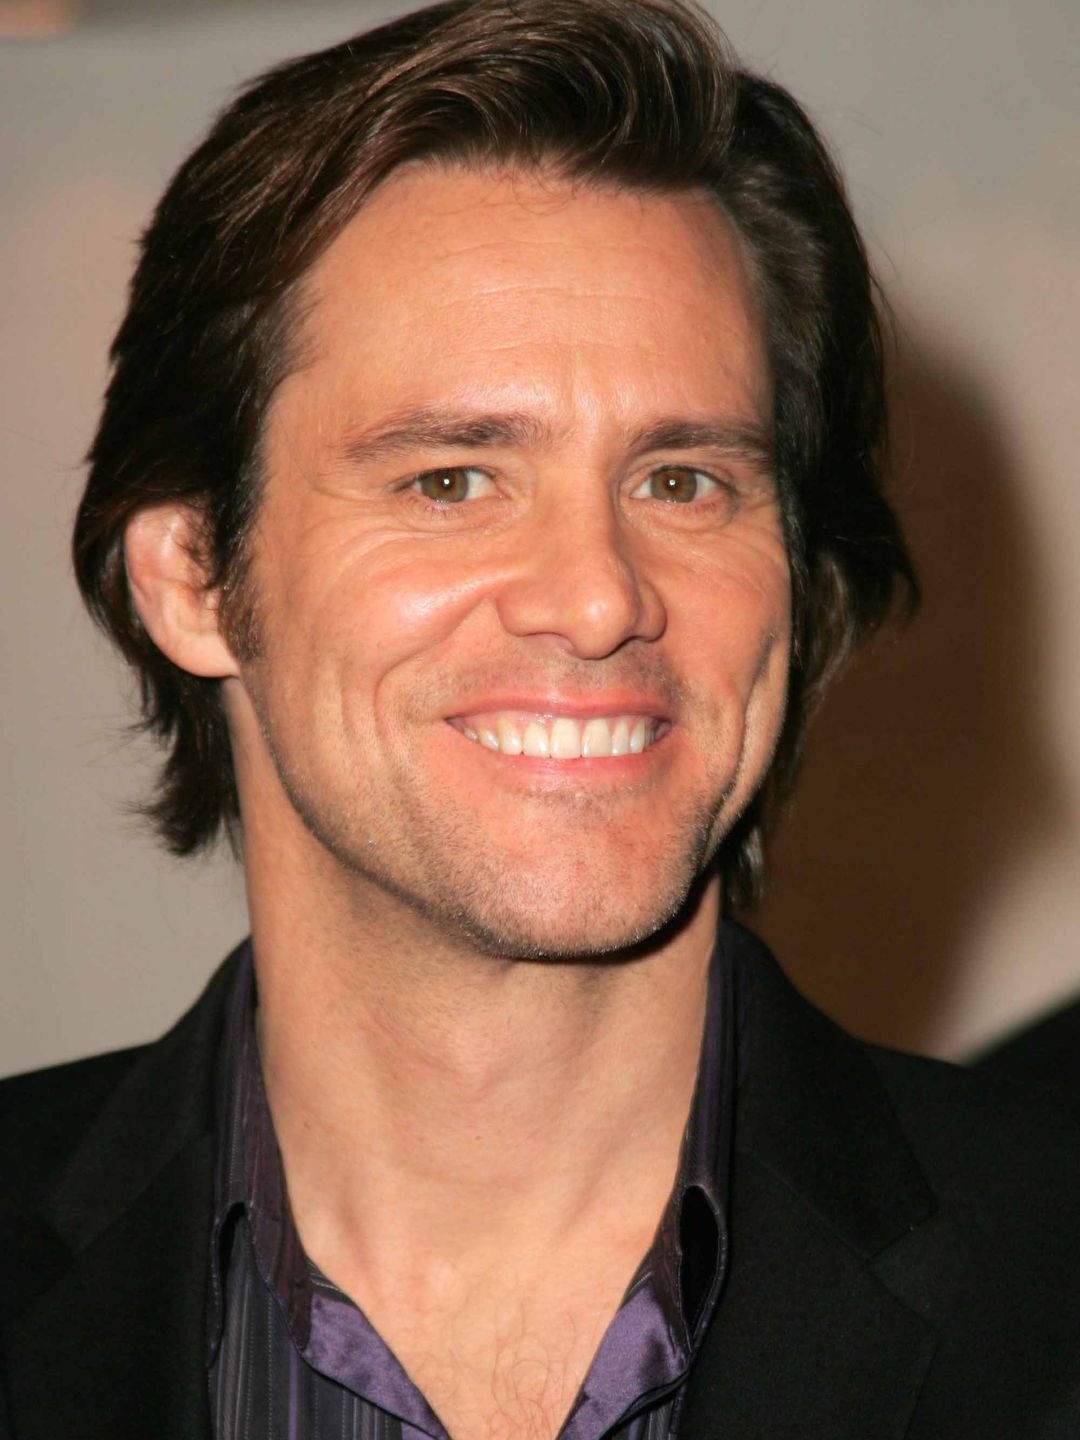 Jim Carrey where is he now